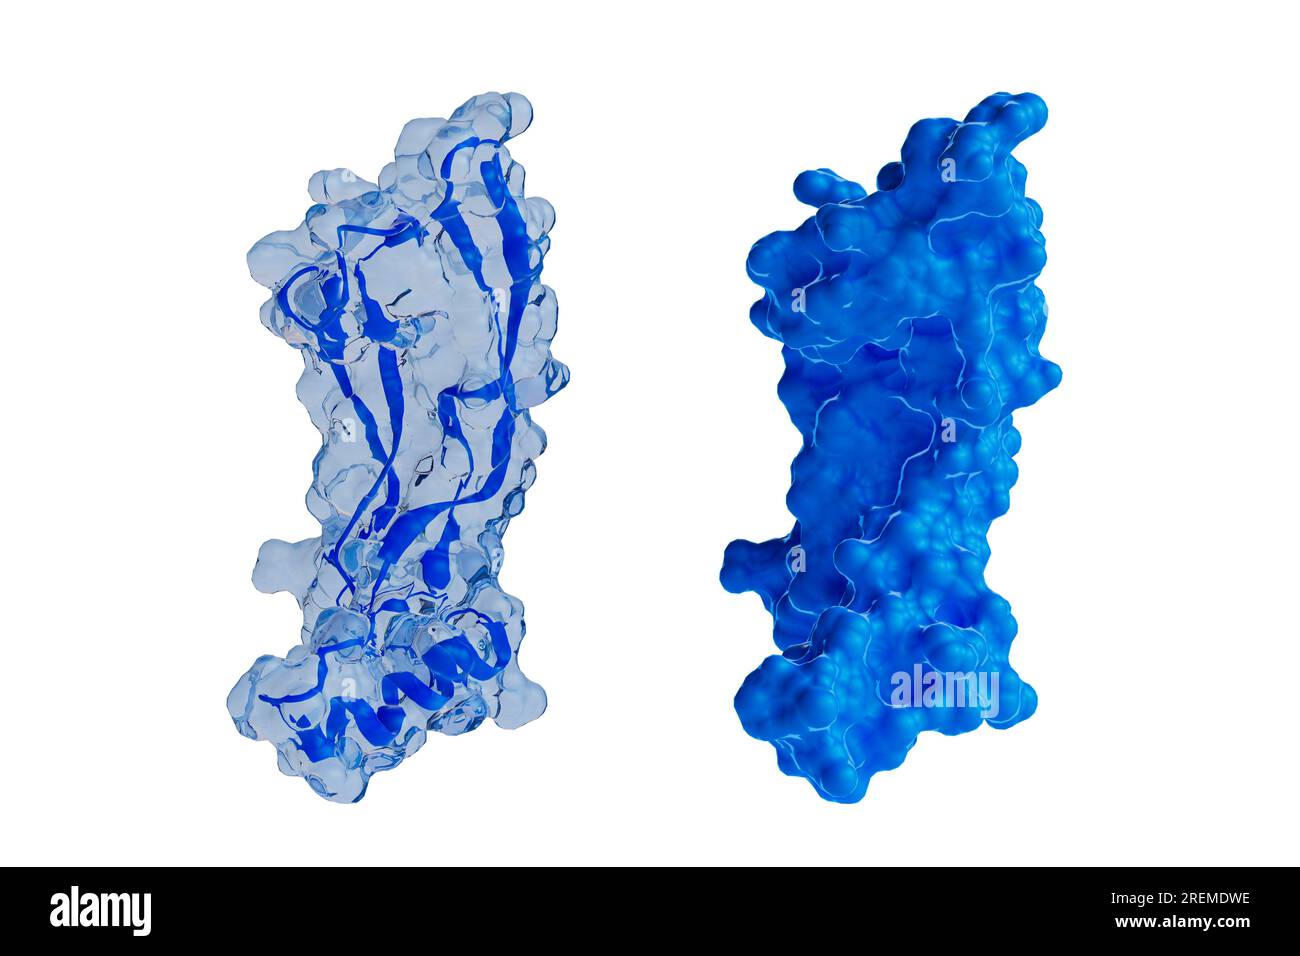 Illustration of human GDF15 (growth differentiation factor 15) protein showing transparent surface with internal ribbon models (left) and surface model in blue (right). GDF15 is produced by organs in response to stress and is also found at high levels in the placenta. It has been proposed to contribute to morning sickness. Stock Photo